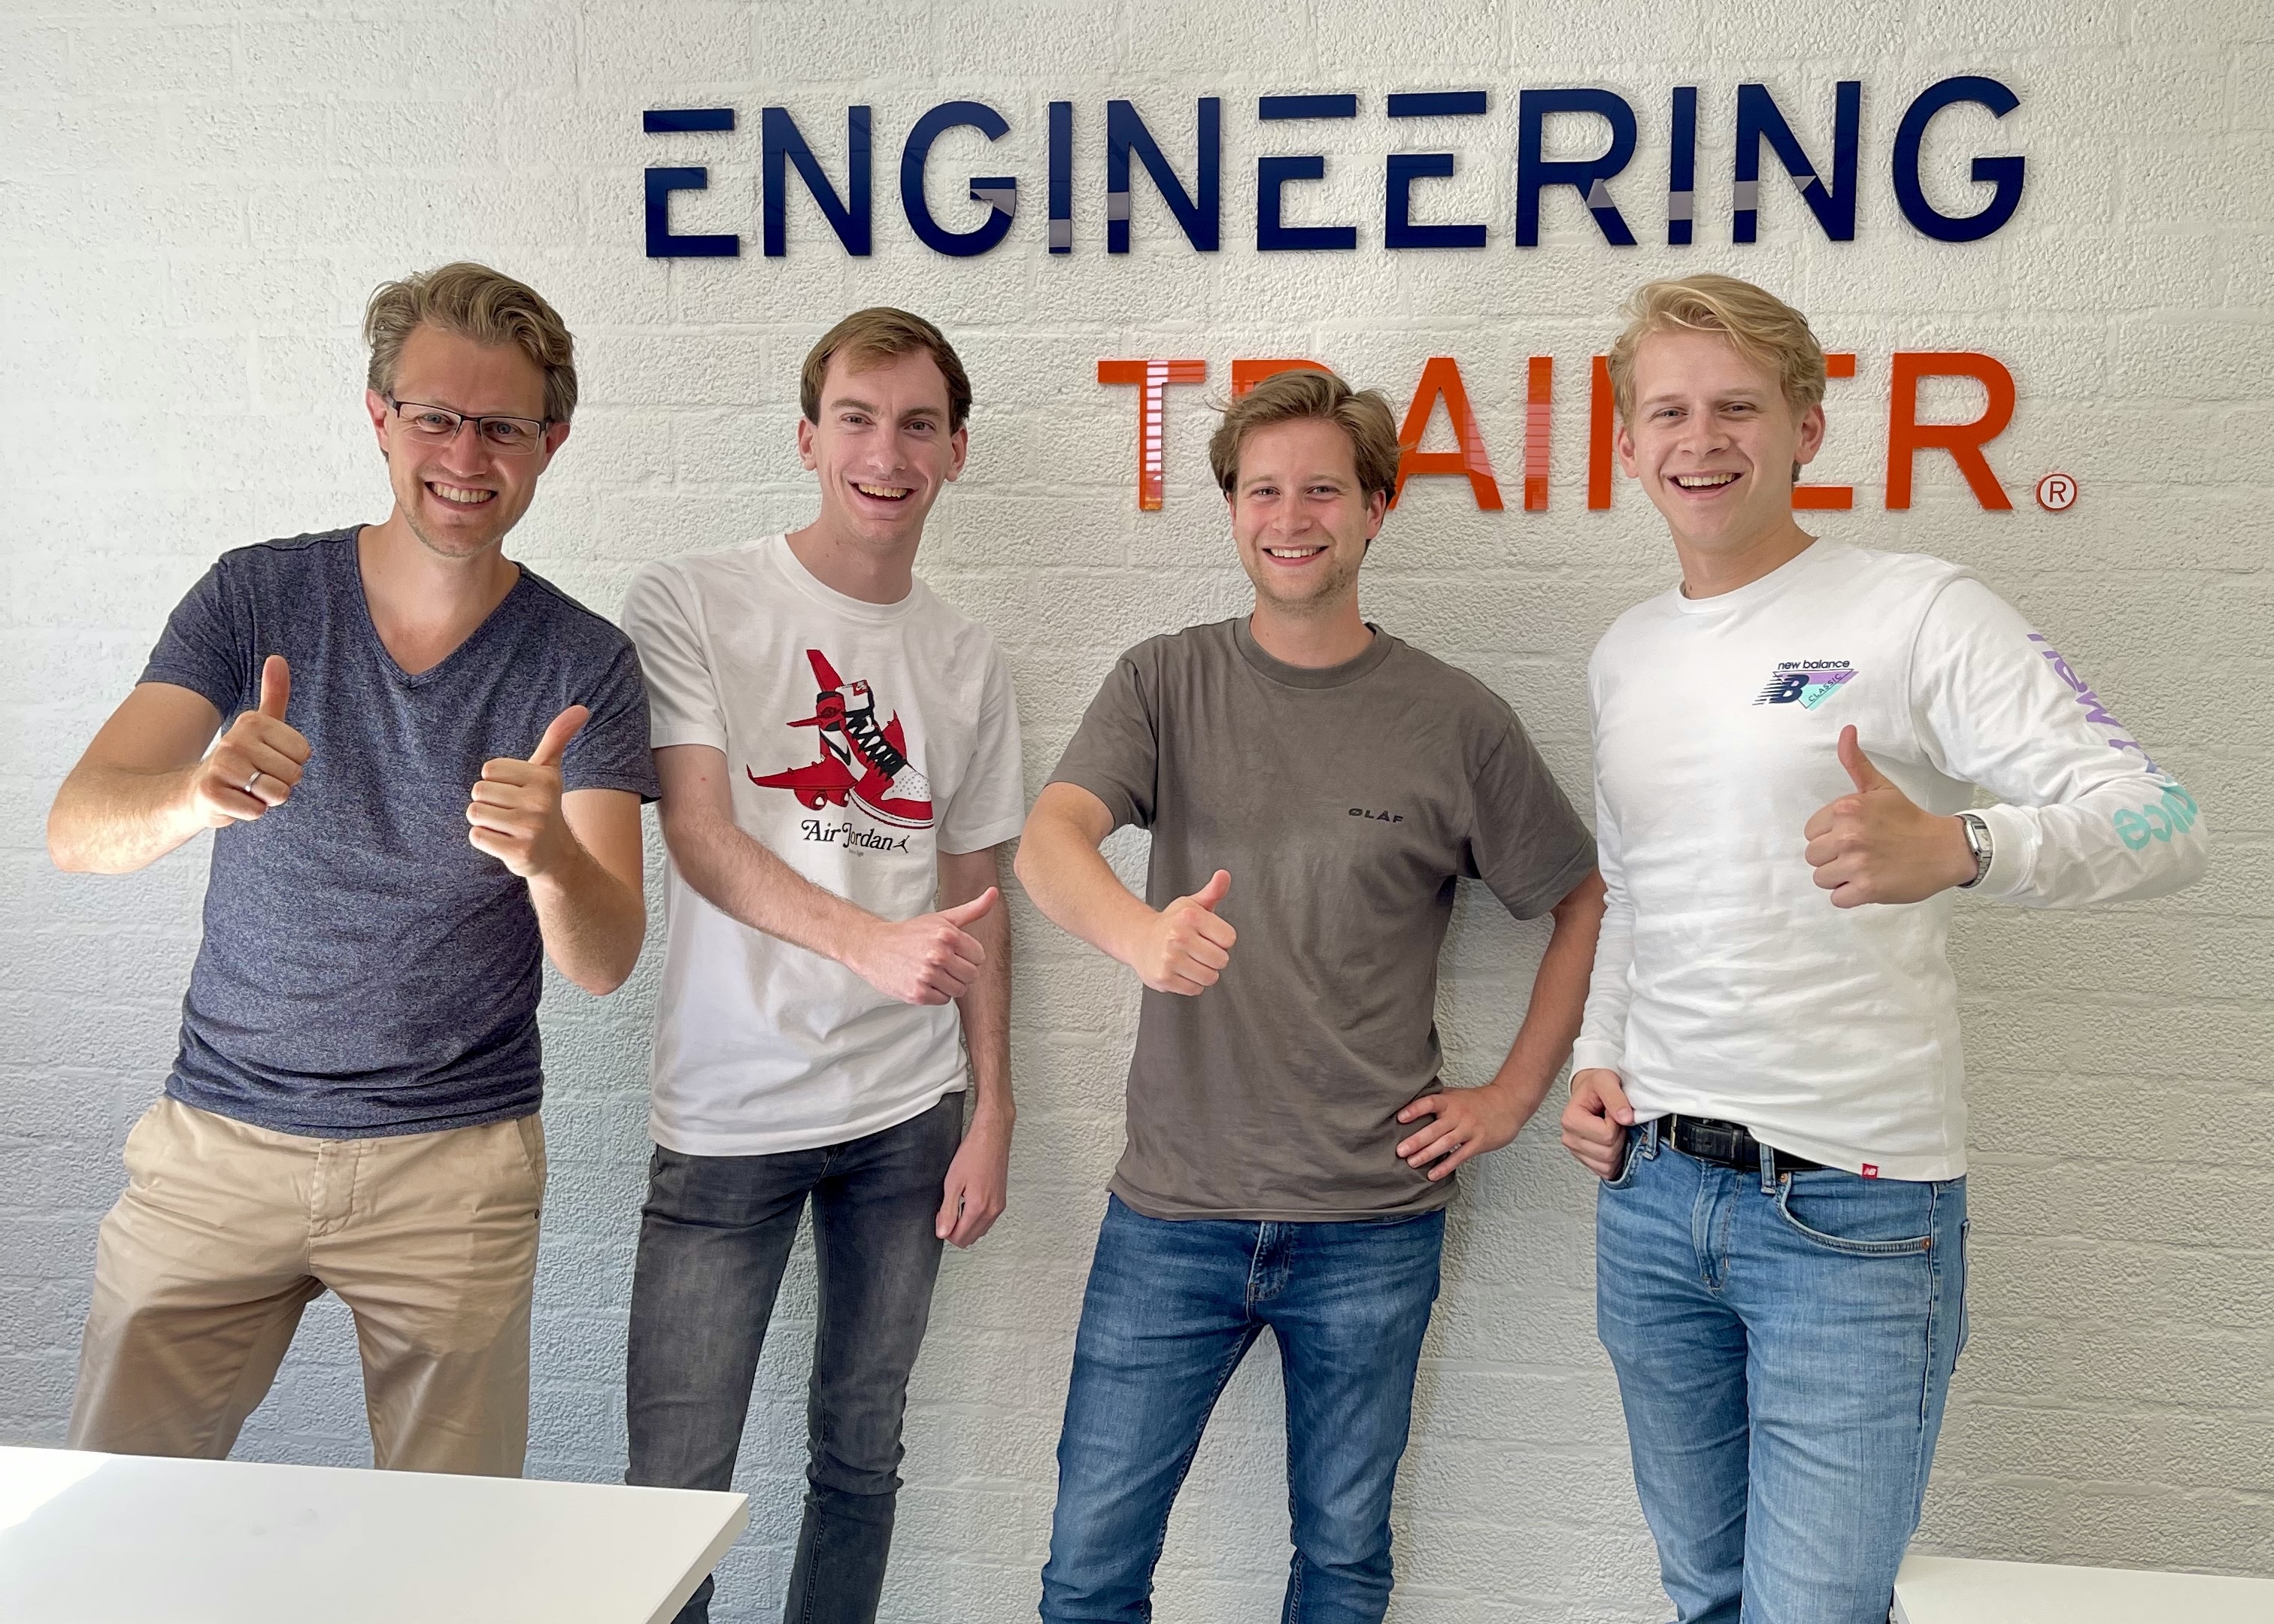 An image of EngineringTrainer employees.